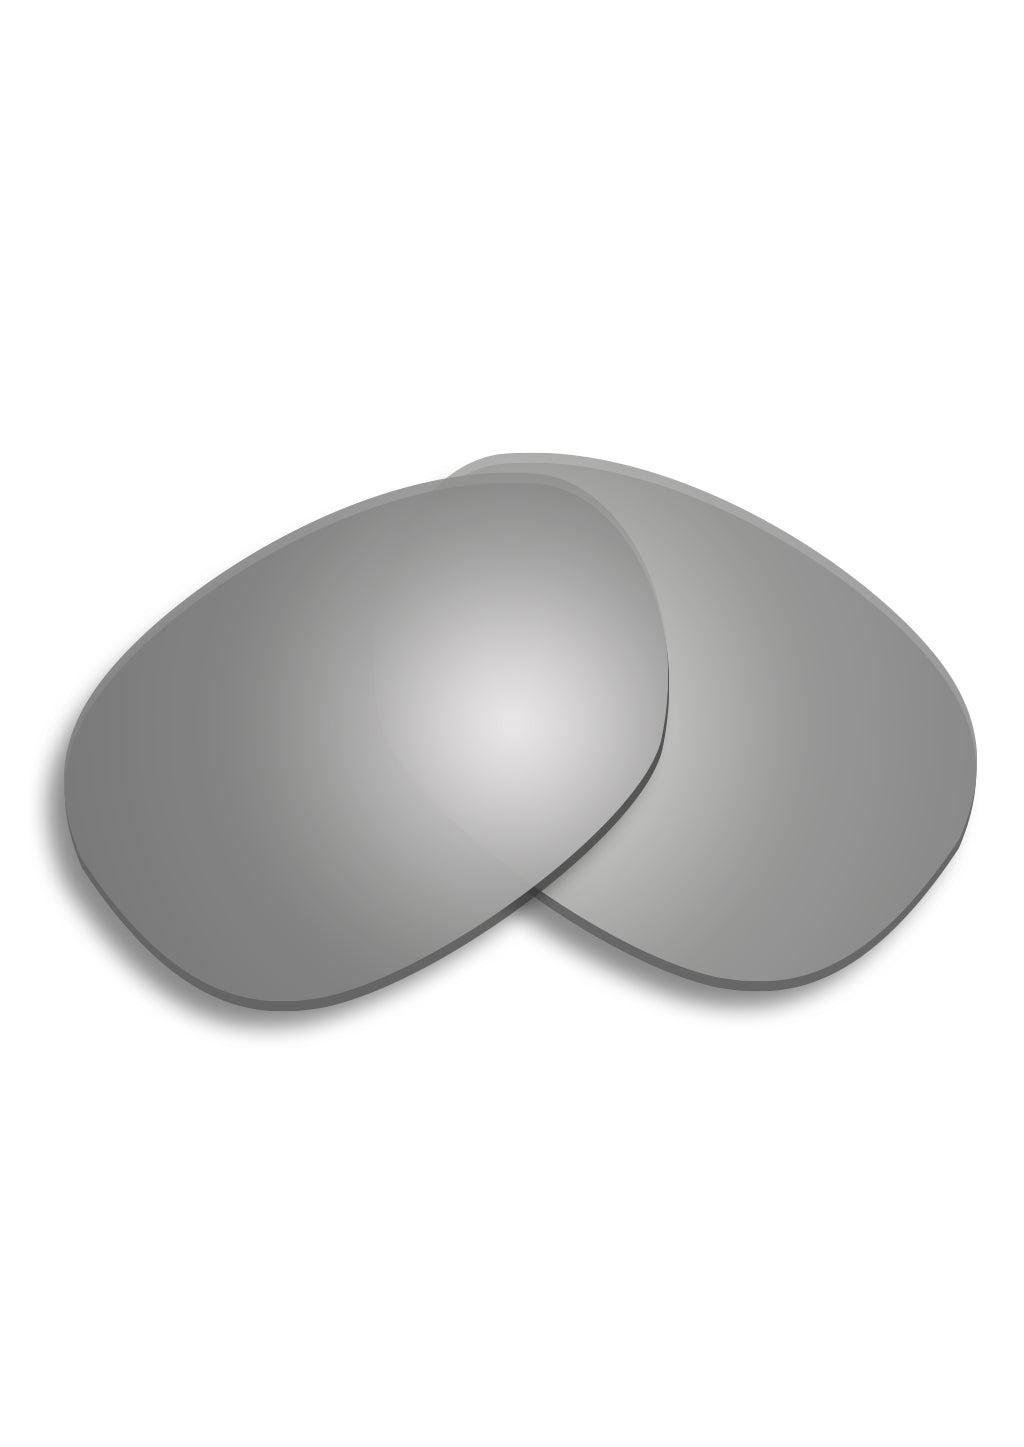 Extra lenses for Titan V2 sunglasses. This is silver mirror.